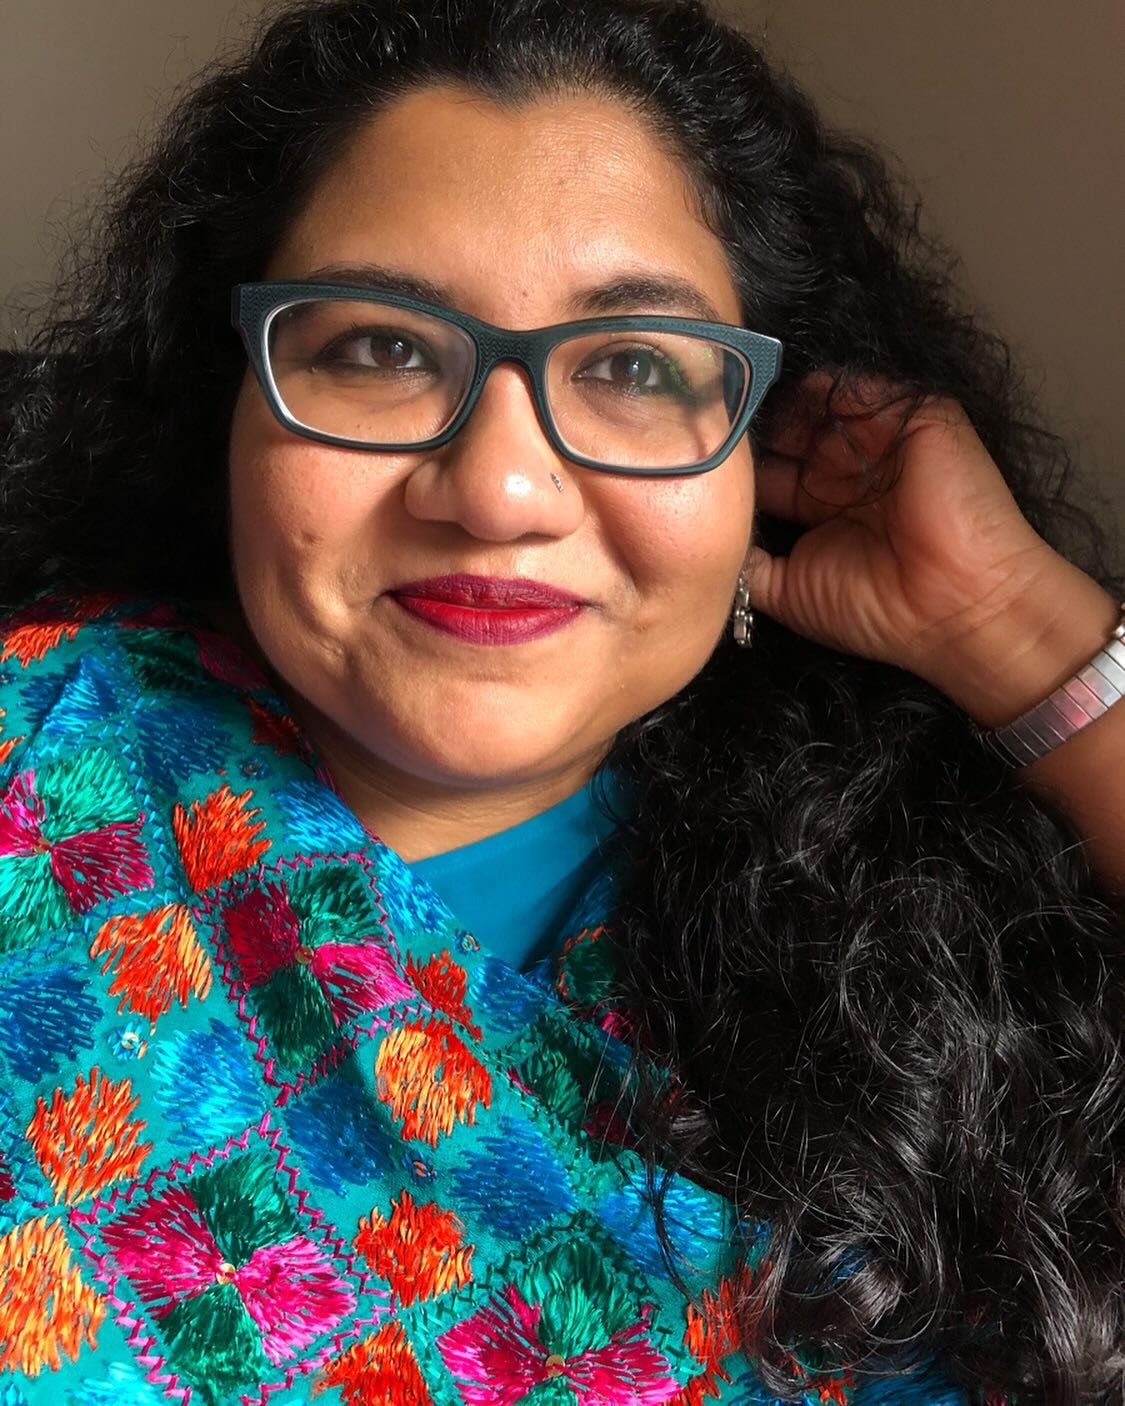 📣 Panelist Introduction 

We are so excited to welcome Sayantani Dasgupta to the EmpowHERmentILM family!

✨Born in Calcutta and raised in New Delhi, Sayantani Dasgupta is the author of the upcoming essay collection Brown Women Have Everything. She r